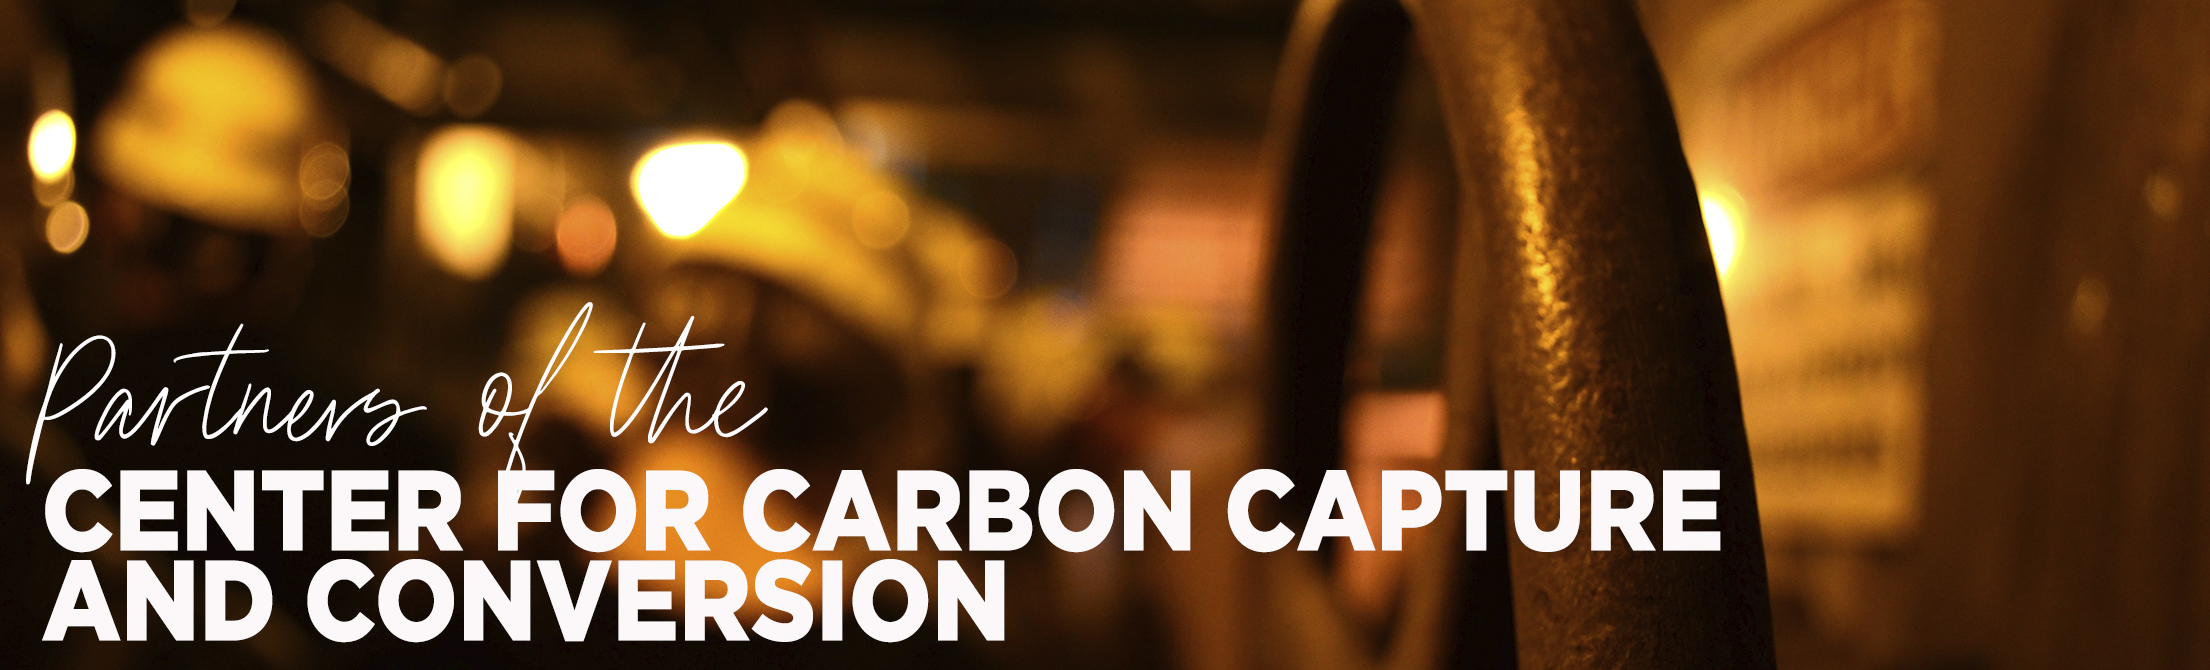 Partners with the Center for Carbon Capture and Conversion